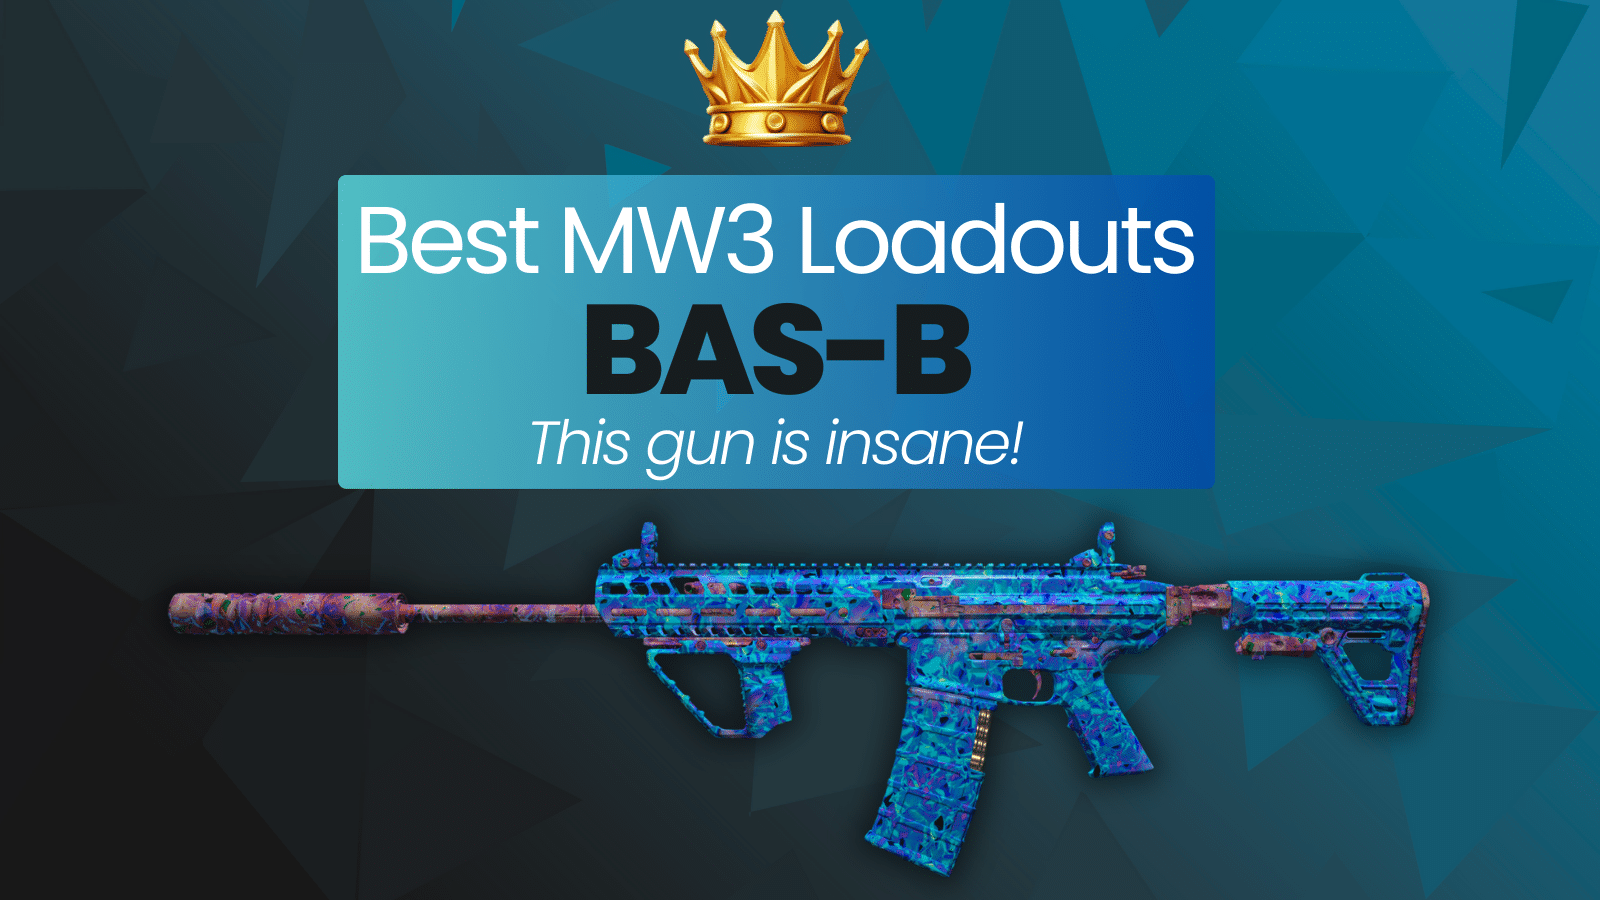 THE BEST BAS-B LOADOUTS FOR MW3 MUTLIPLAYER – THIS GUN IS META!